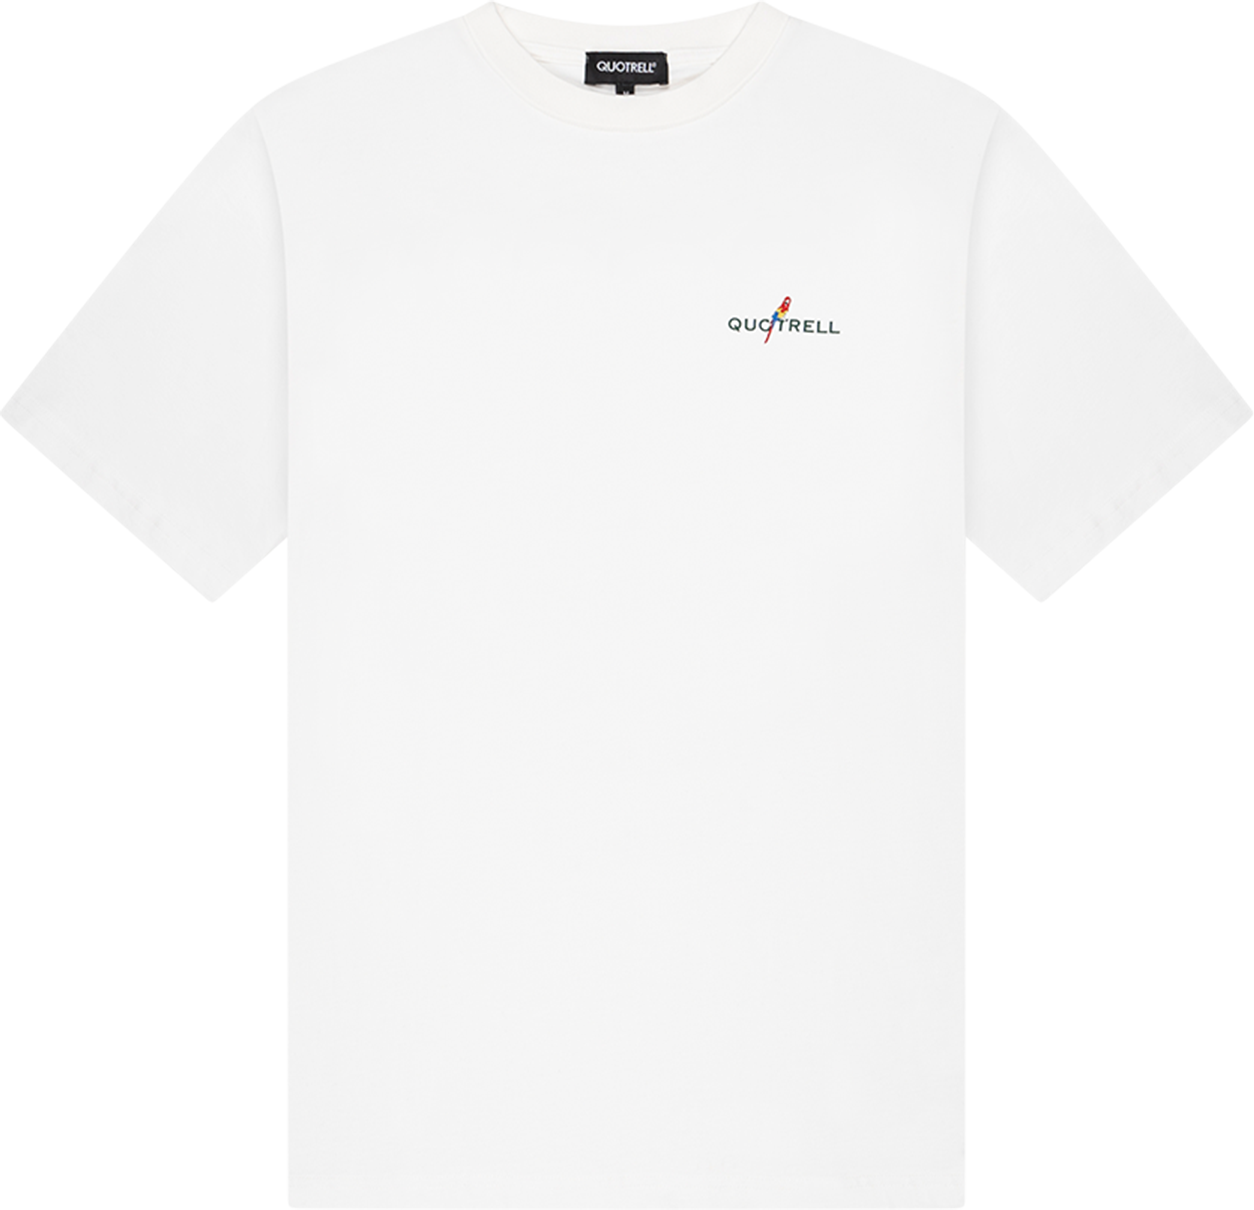 Quotrell Resort T-shirt | Off White/green Wit